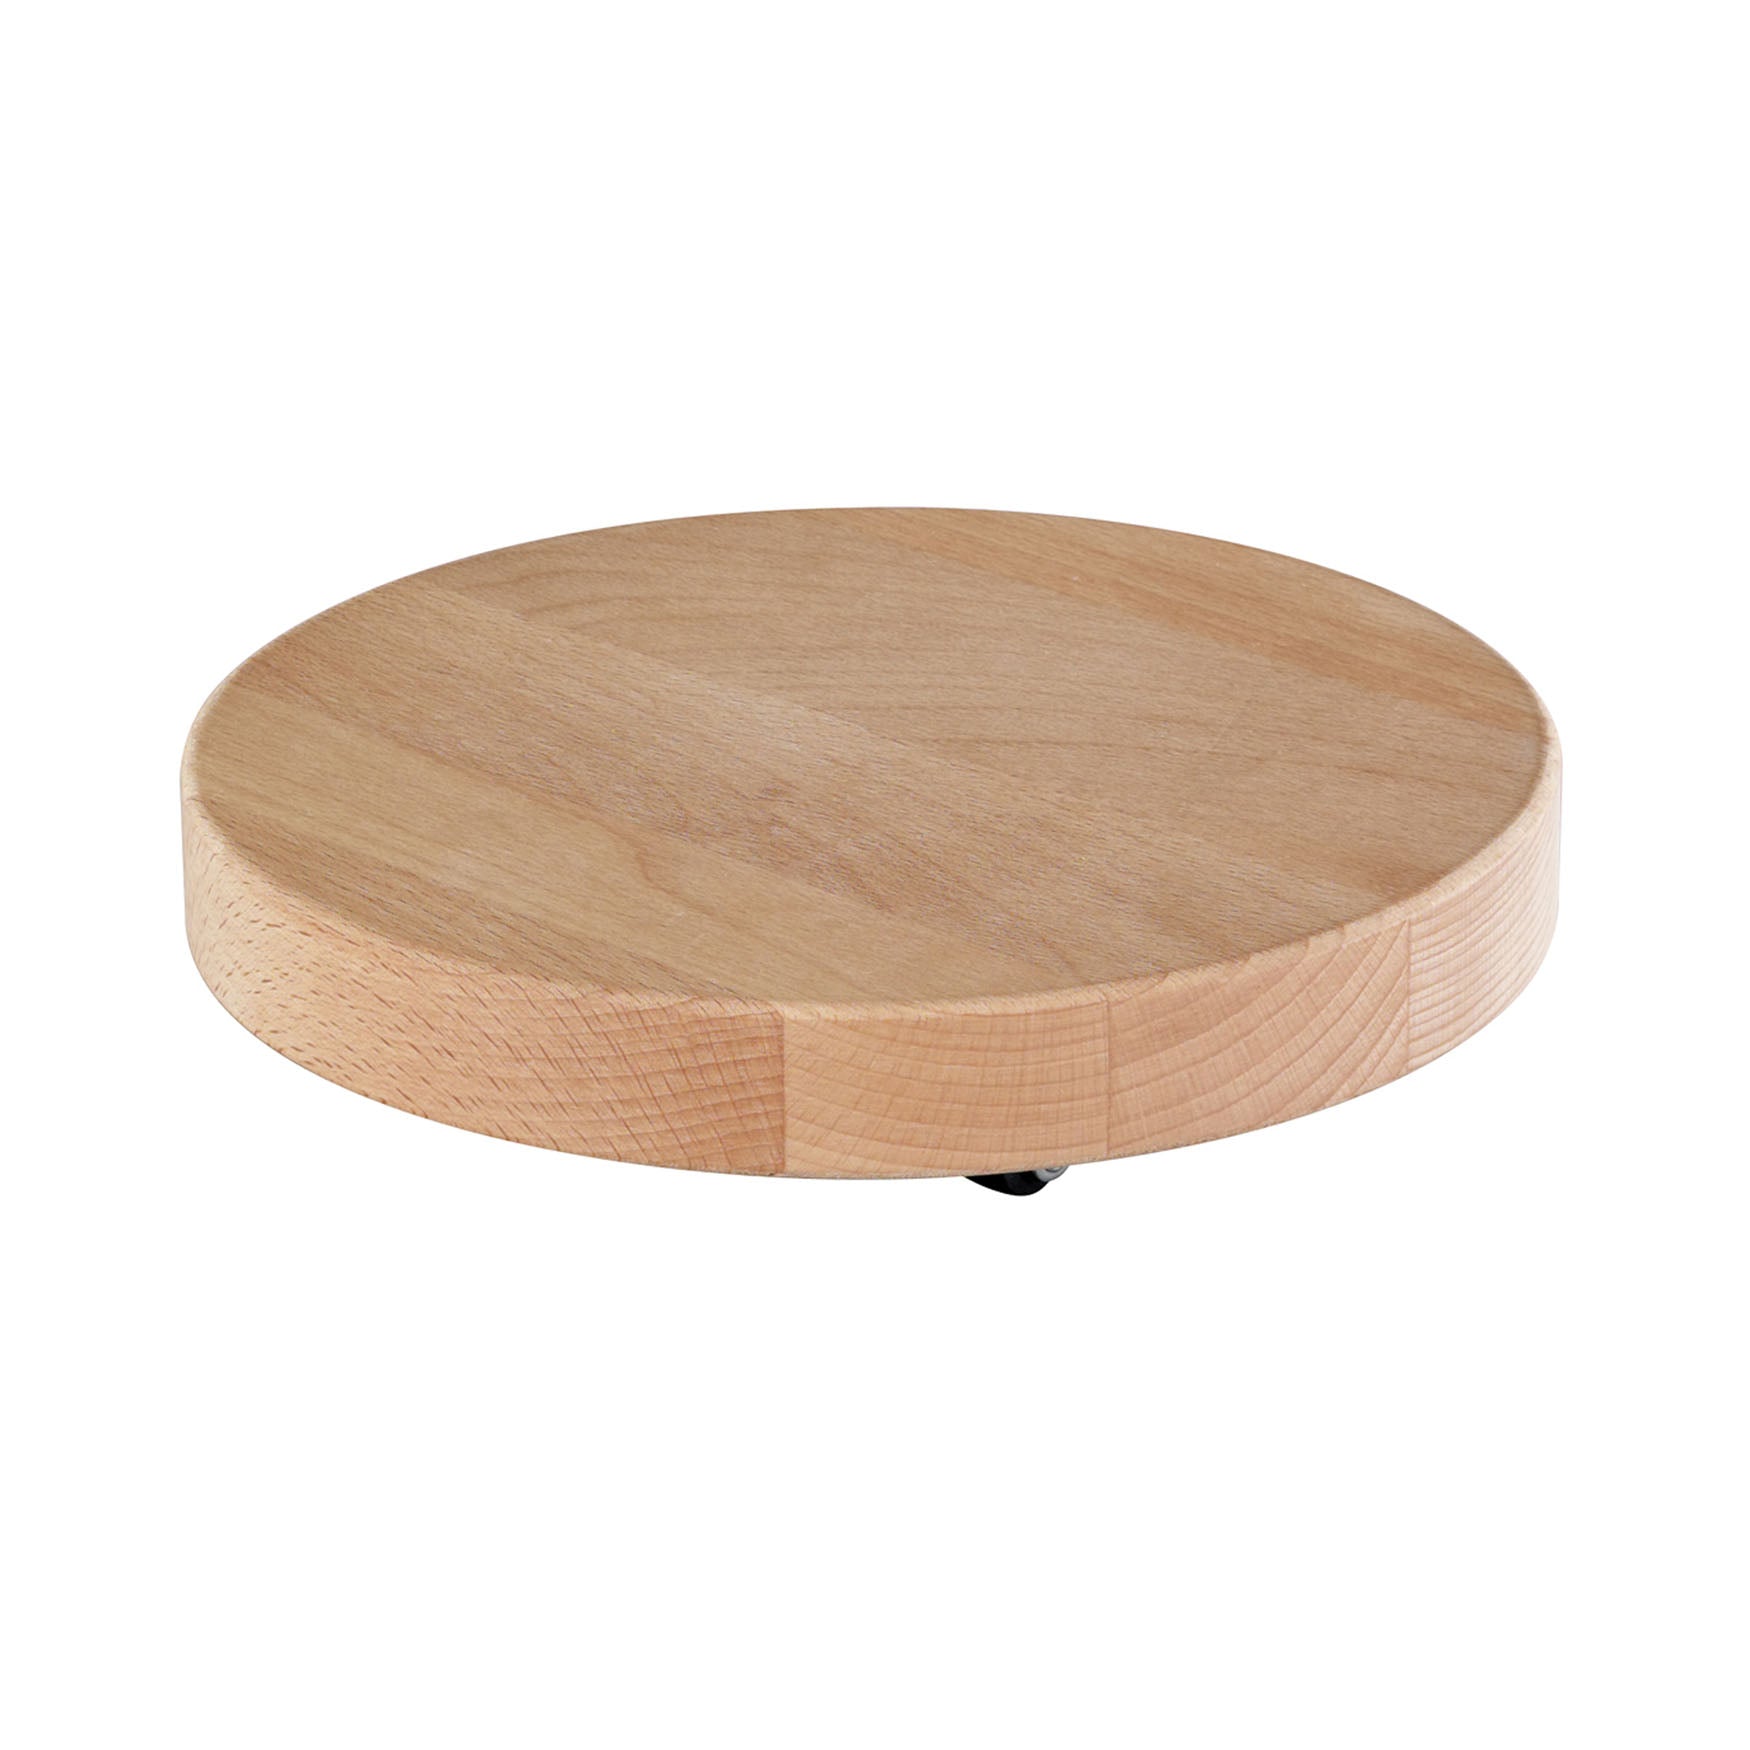 10" natural round wooden plant caddy w/no-show casters. Made from beech wood. 220 lbs. capacity. 9.6"D x 1.8"H 2.3 lbs.